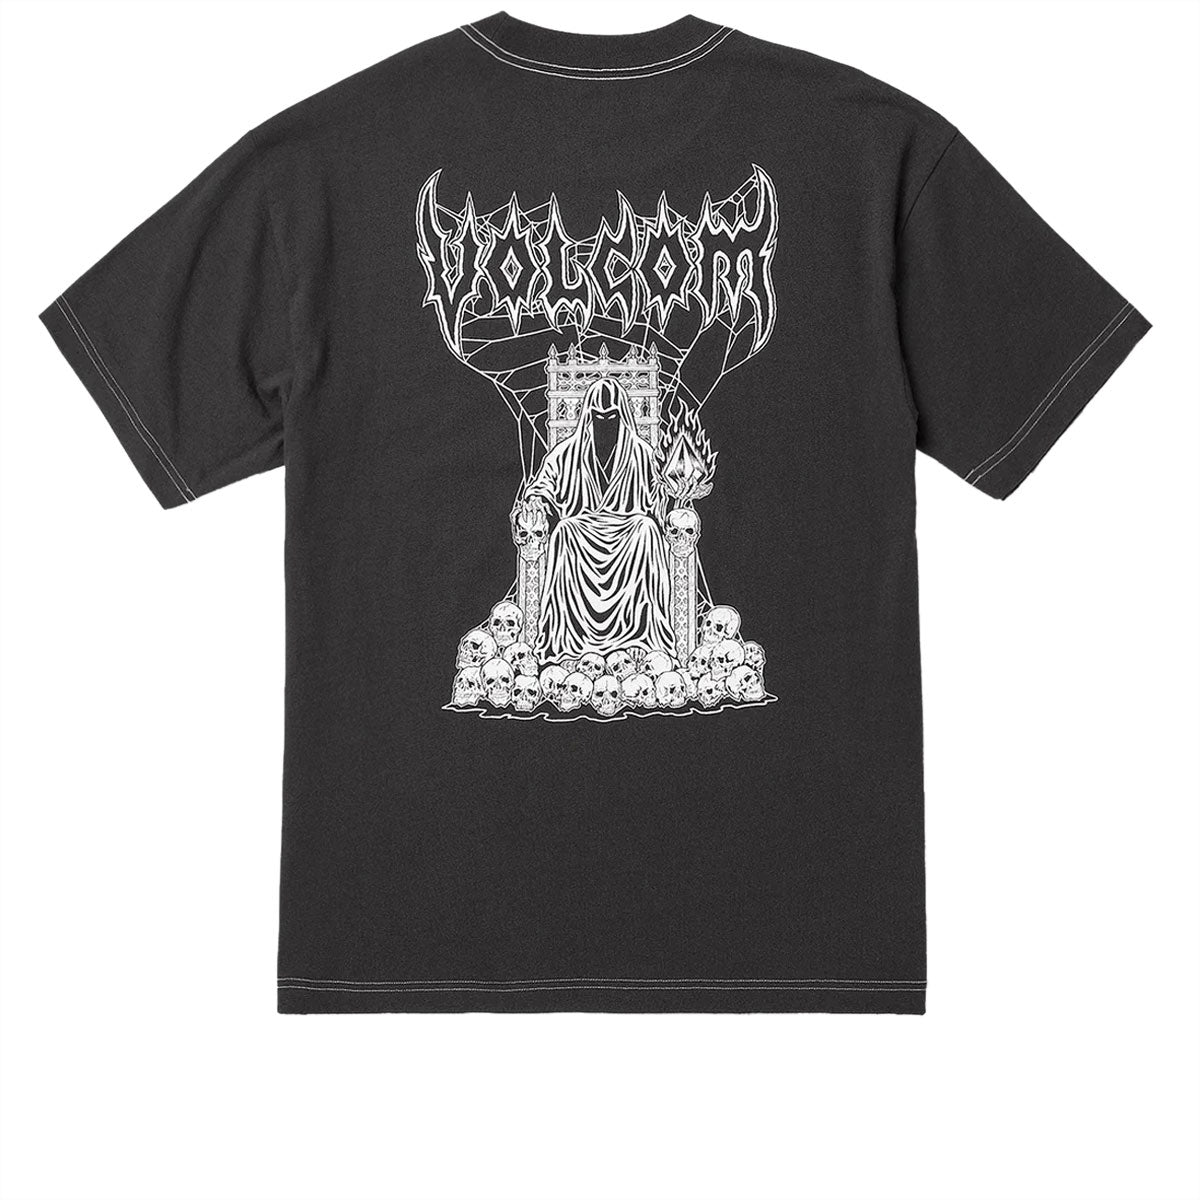 Volcom Stone Lord T-Shirt - Stealth image 2